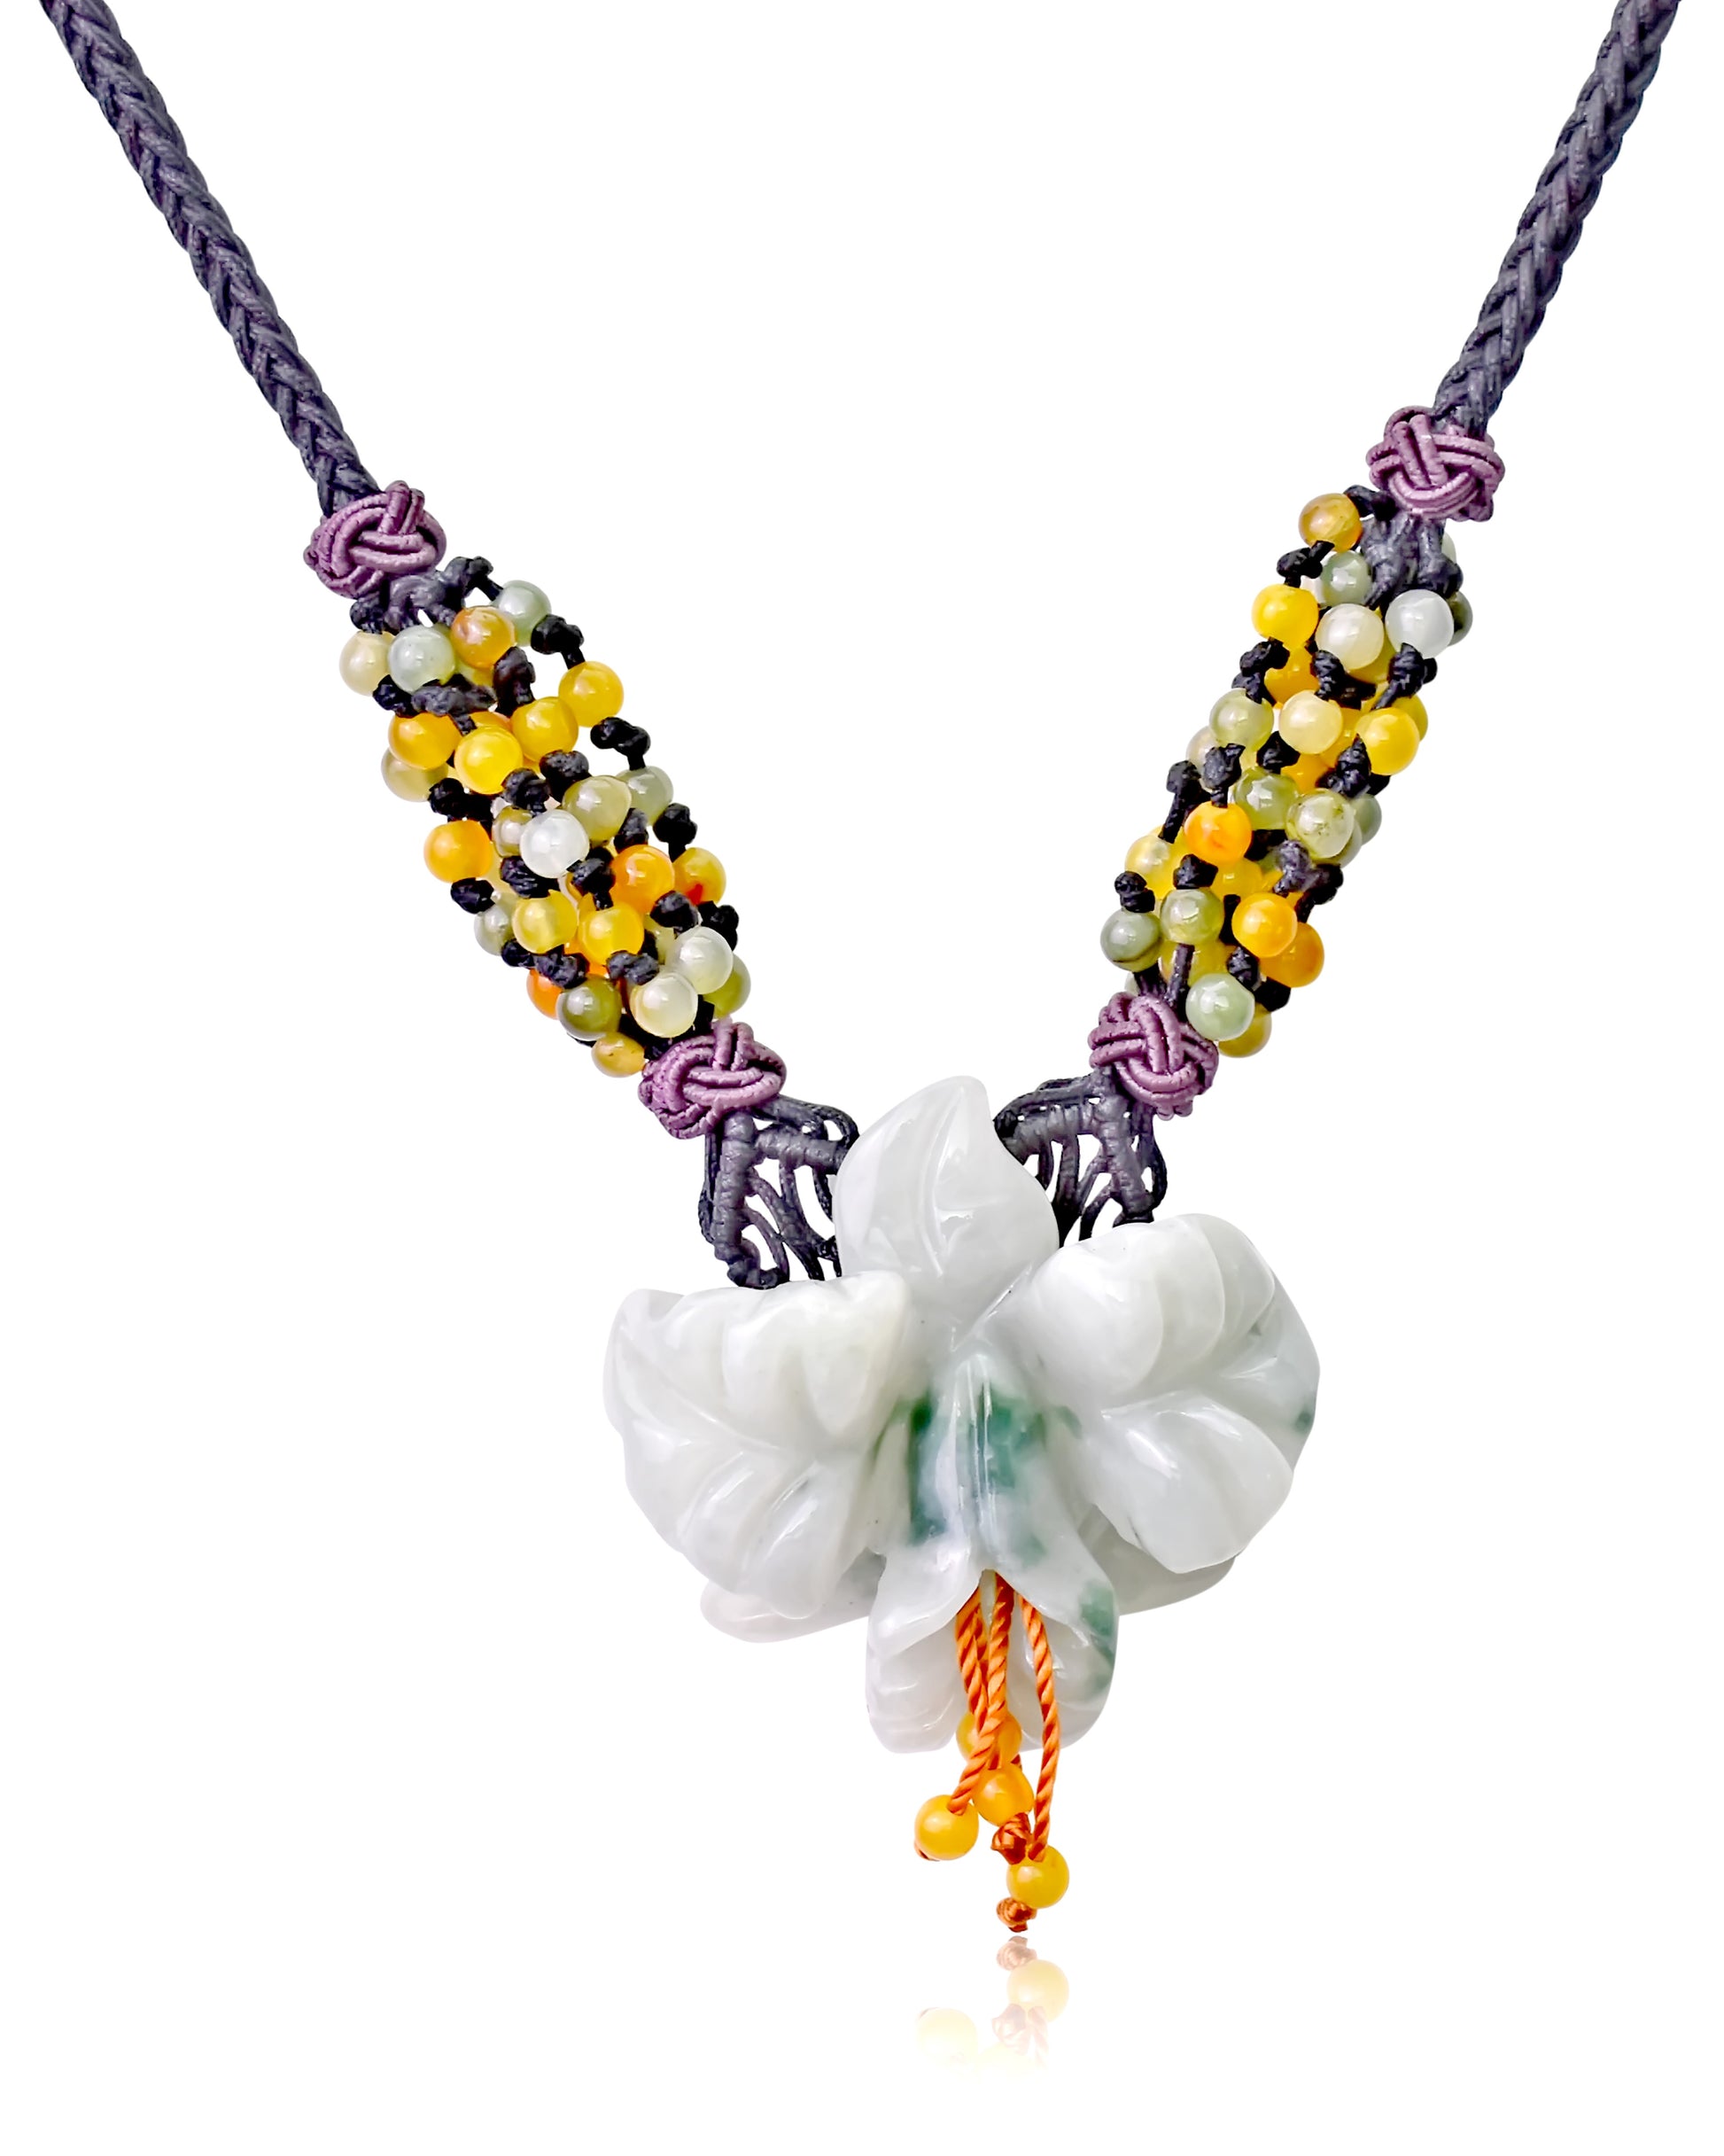 Add Elegance and Charm to Any Outfit with Iris Flower Necklace made with Black Cord